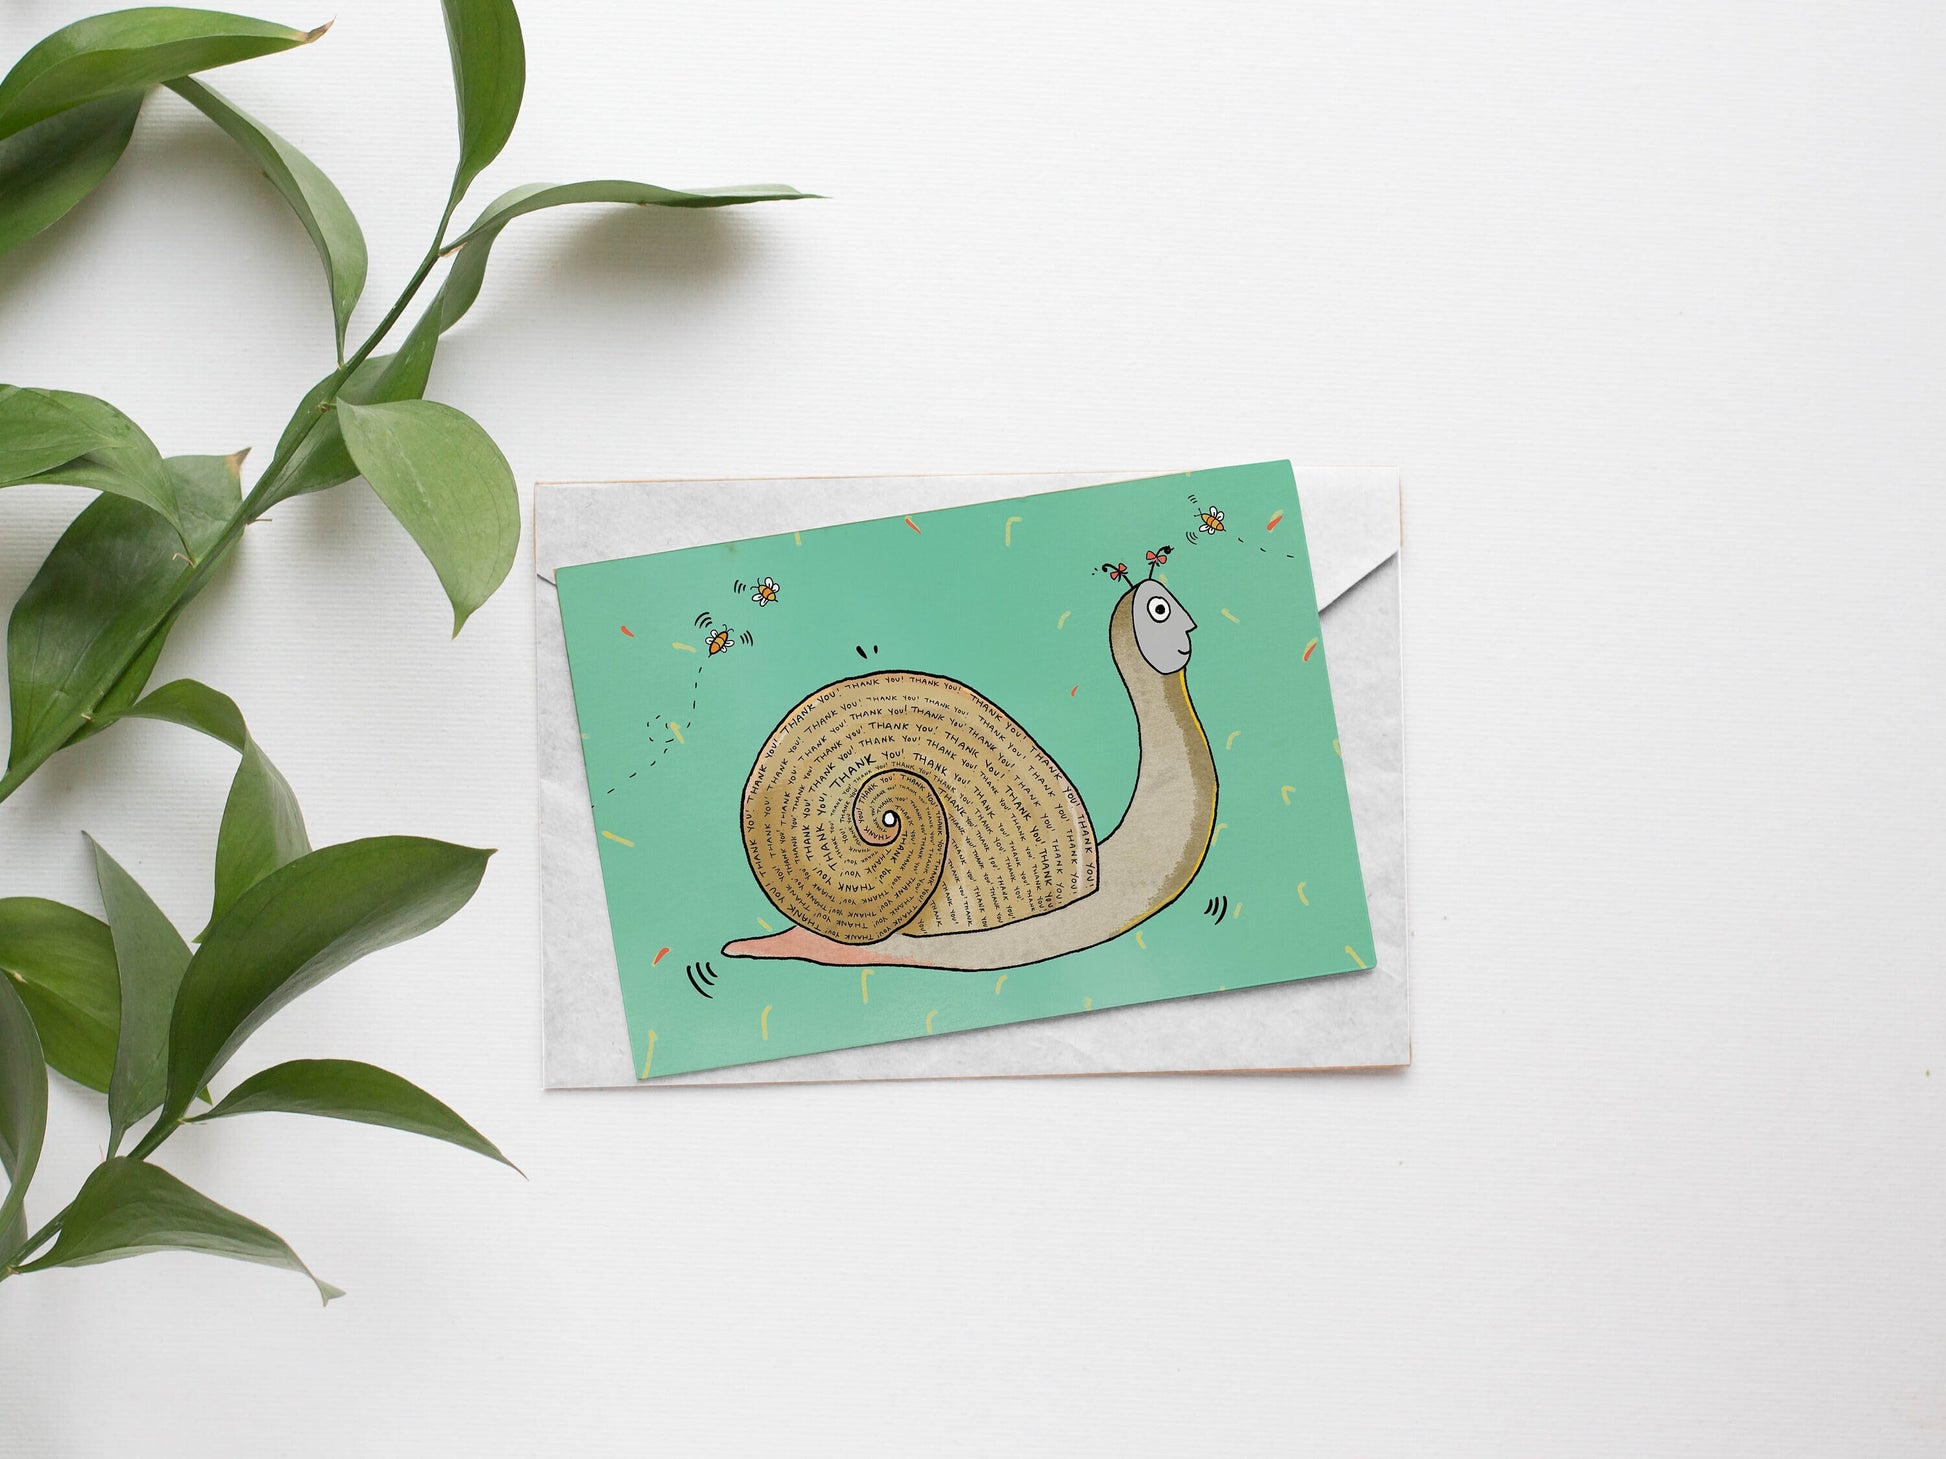 Thank You Card, Fun Snail Card, Cute Thank You Card for Friend, Mollusk Shell Card for Mom, Funny Gift for Sister, Thoughtful Teacher Card